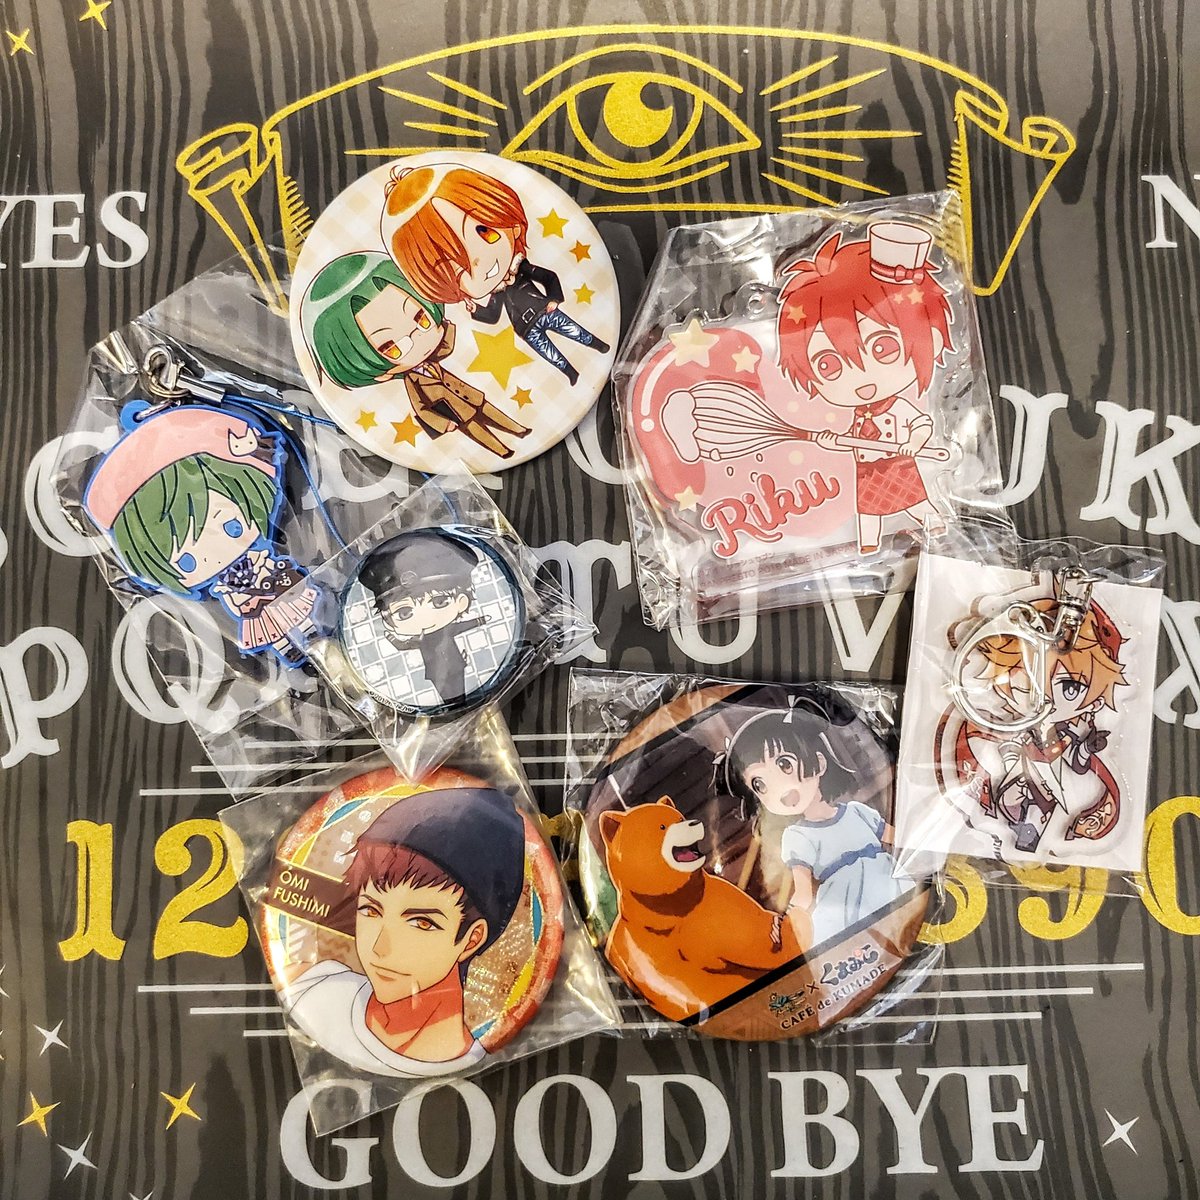 destashing my excess otome goods! pricing slightly negotiable if purchased through p4ypal instead of m3rcari!
mercari.com/u/159992067?sv…